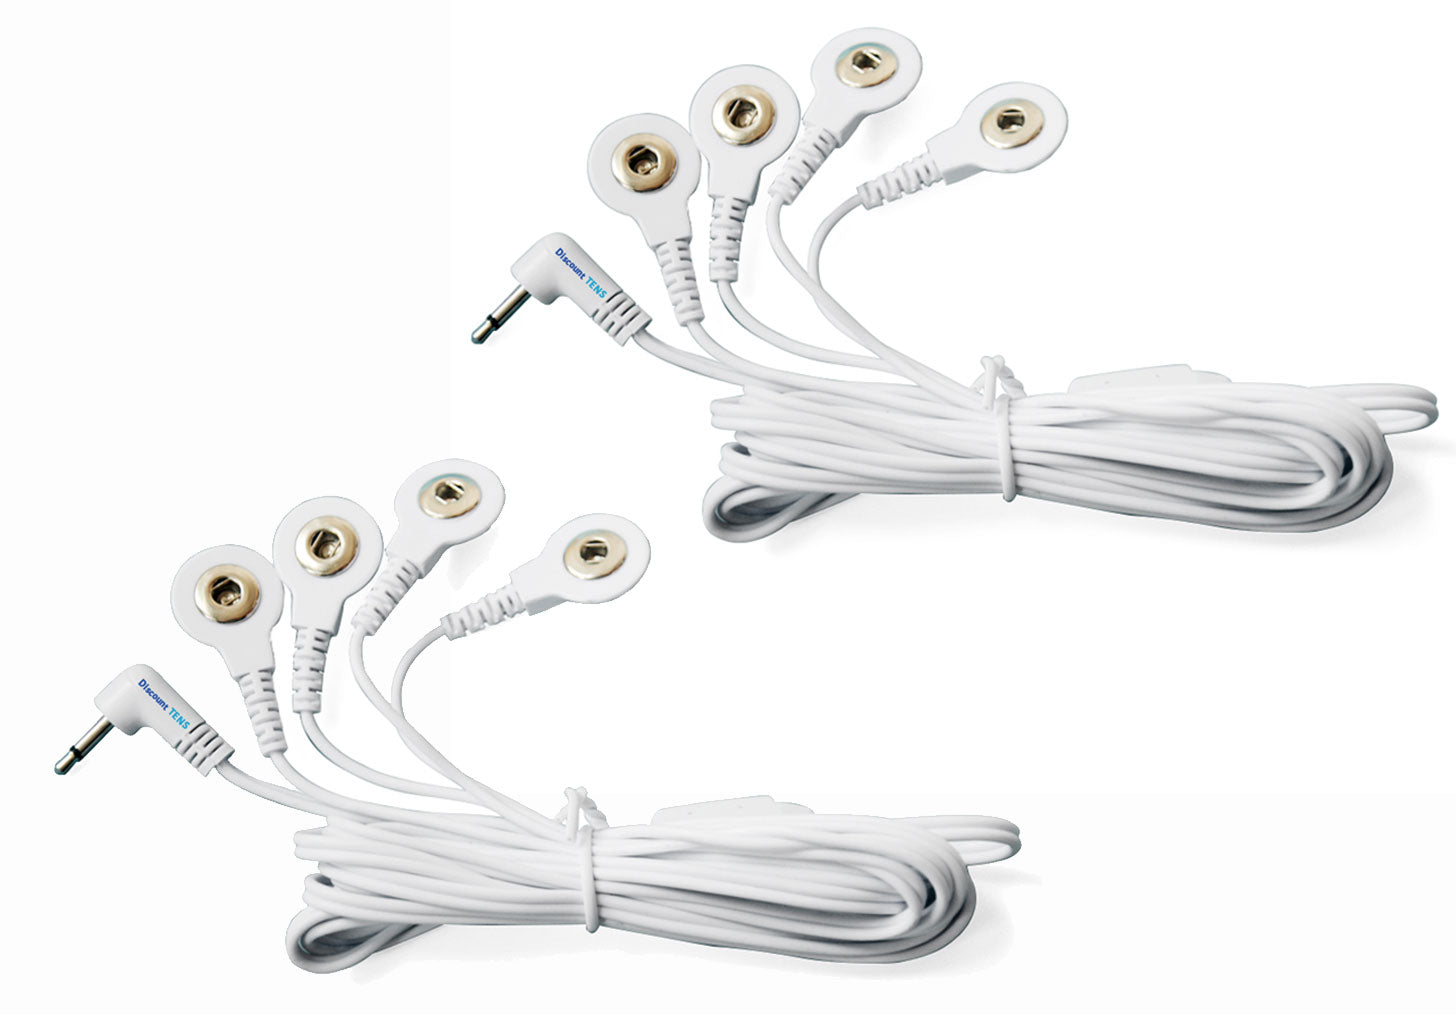 TENS 7000 Lead Wires - TENS Unit Lead Wires For Electrodes - 5